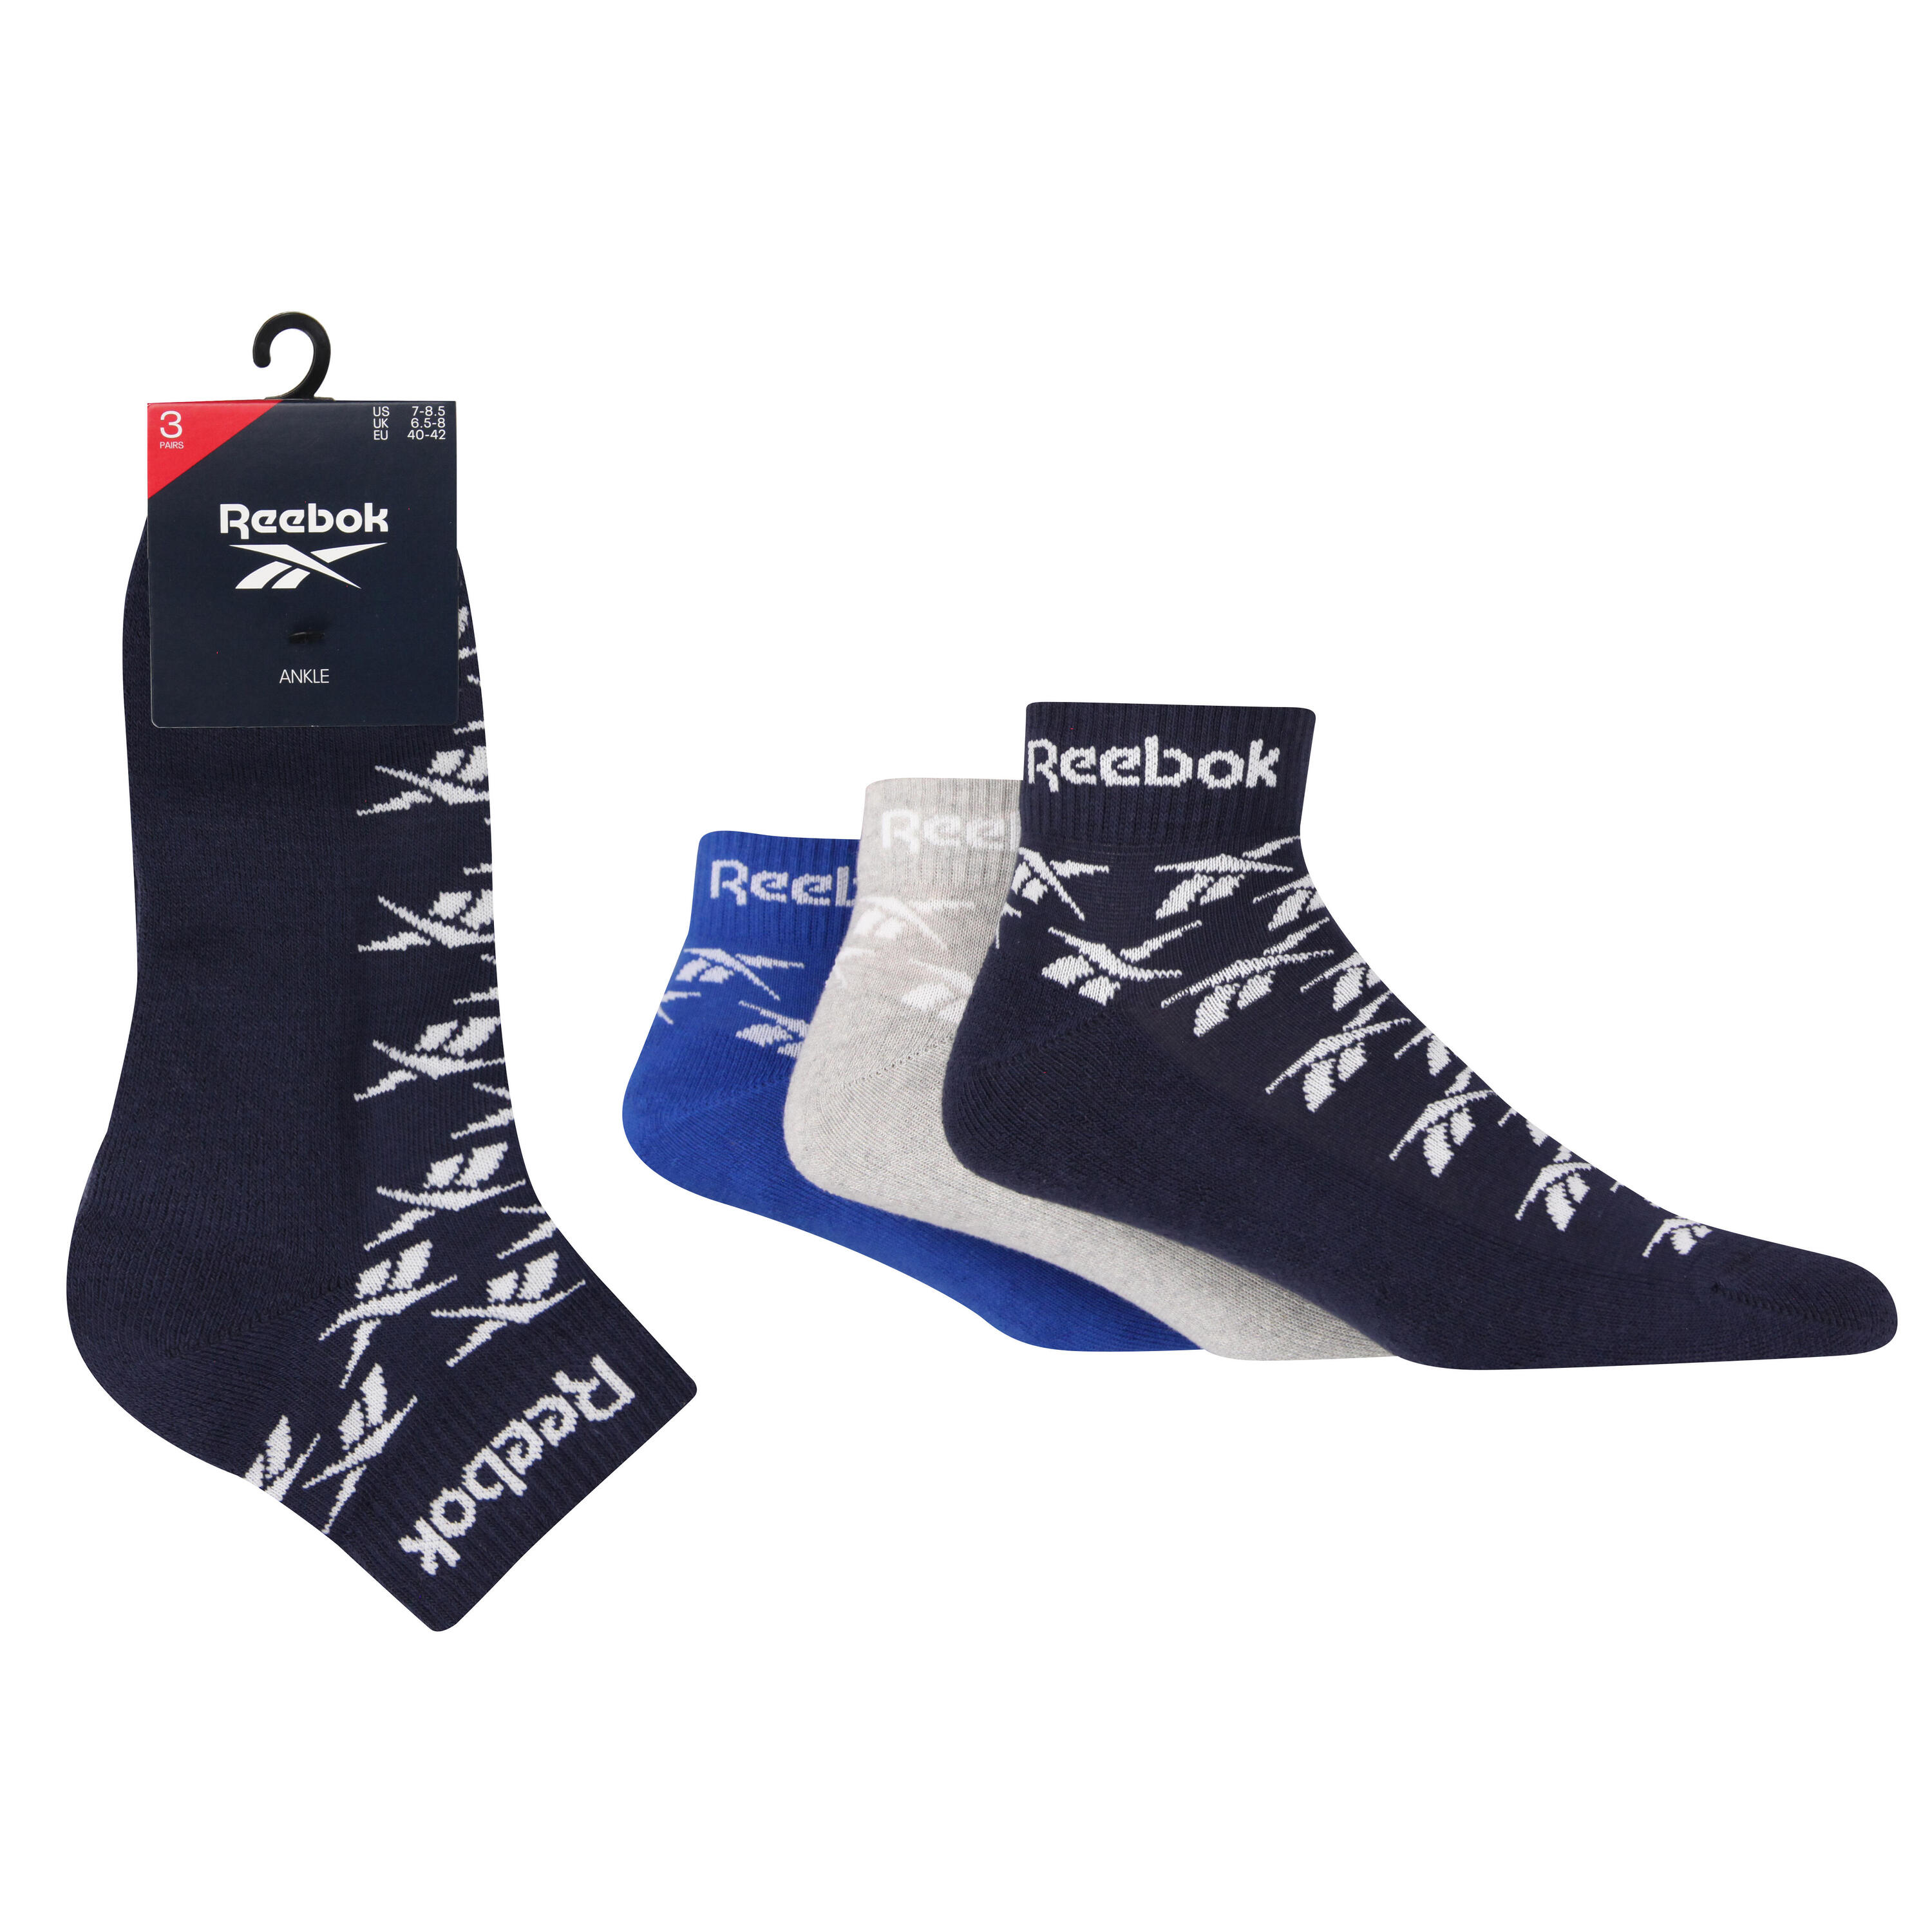 REEBOK 3 Pack Quarter Length Ankle Sport Socks With Cushioned Sole And Seamless Toes